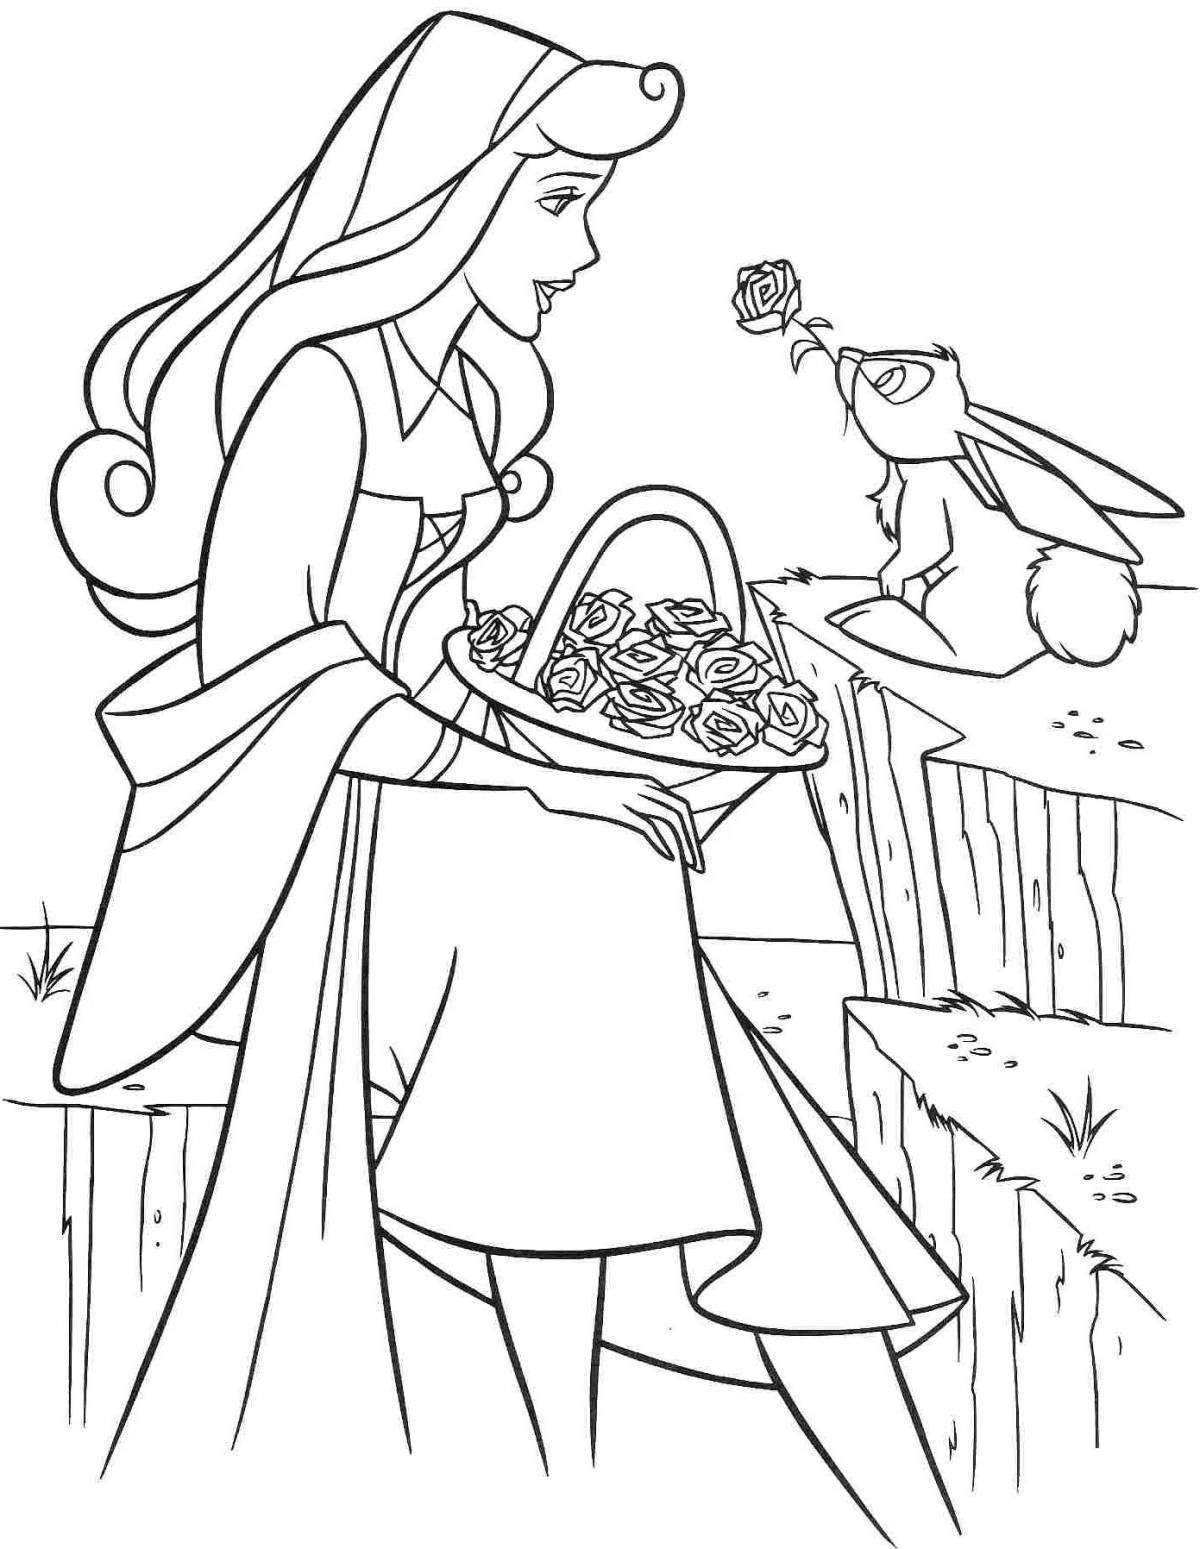 Sleeping Beauty coloring book for kids